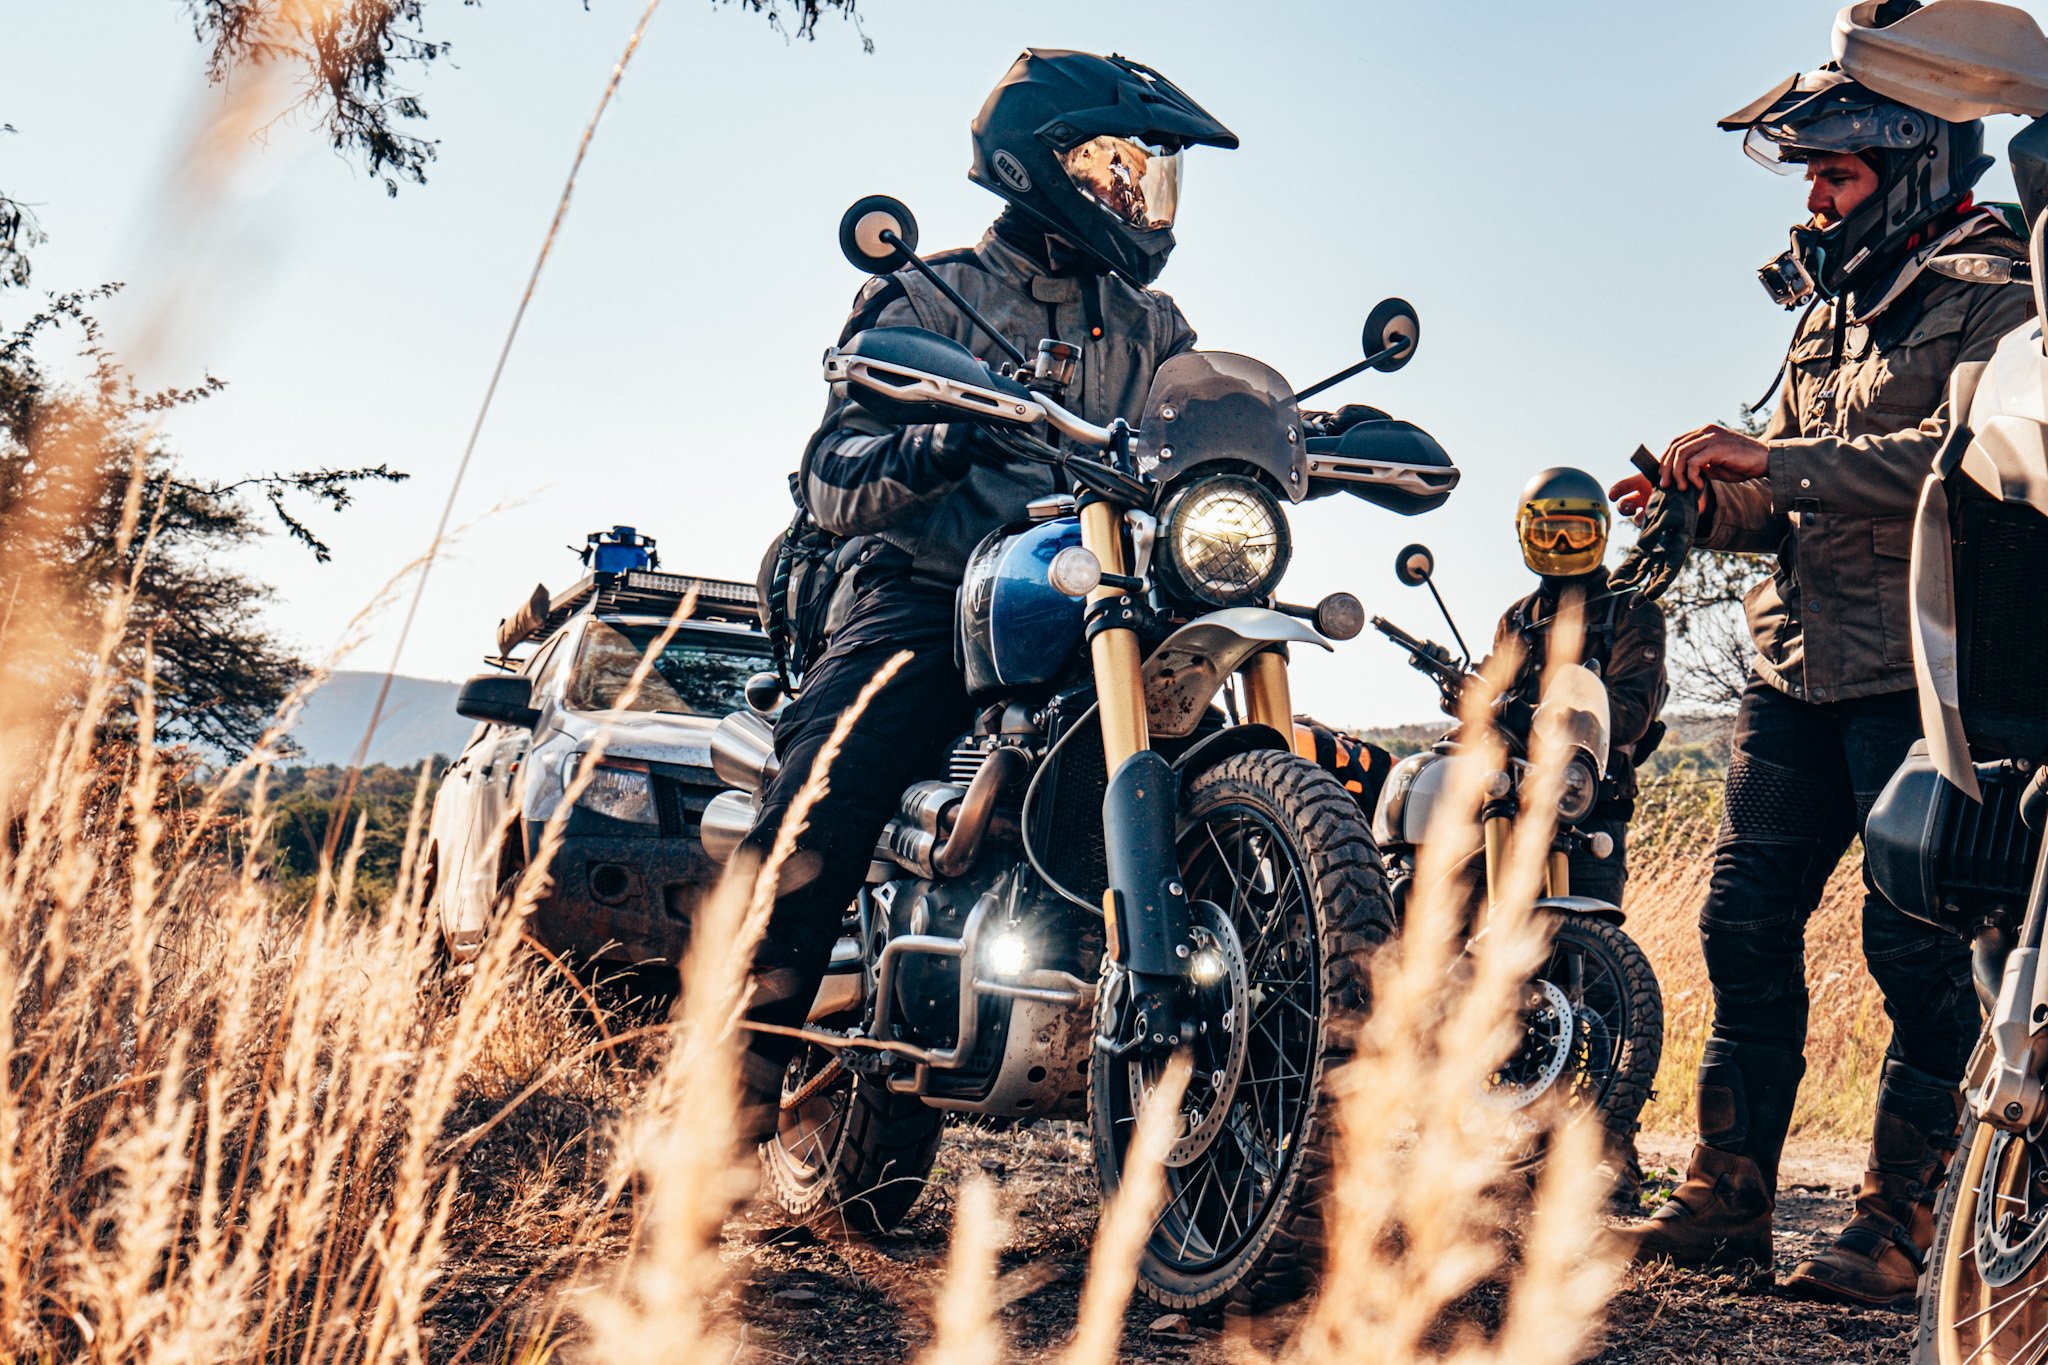 Bonafide Moto Co | Motorcycle Adventures, Tours, Experiences & Events in  Southern Africa